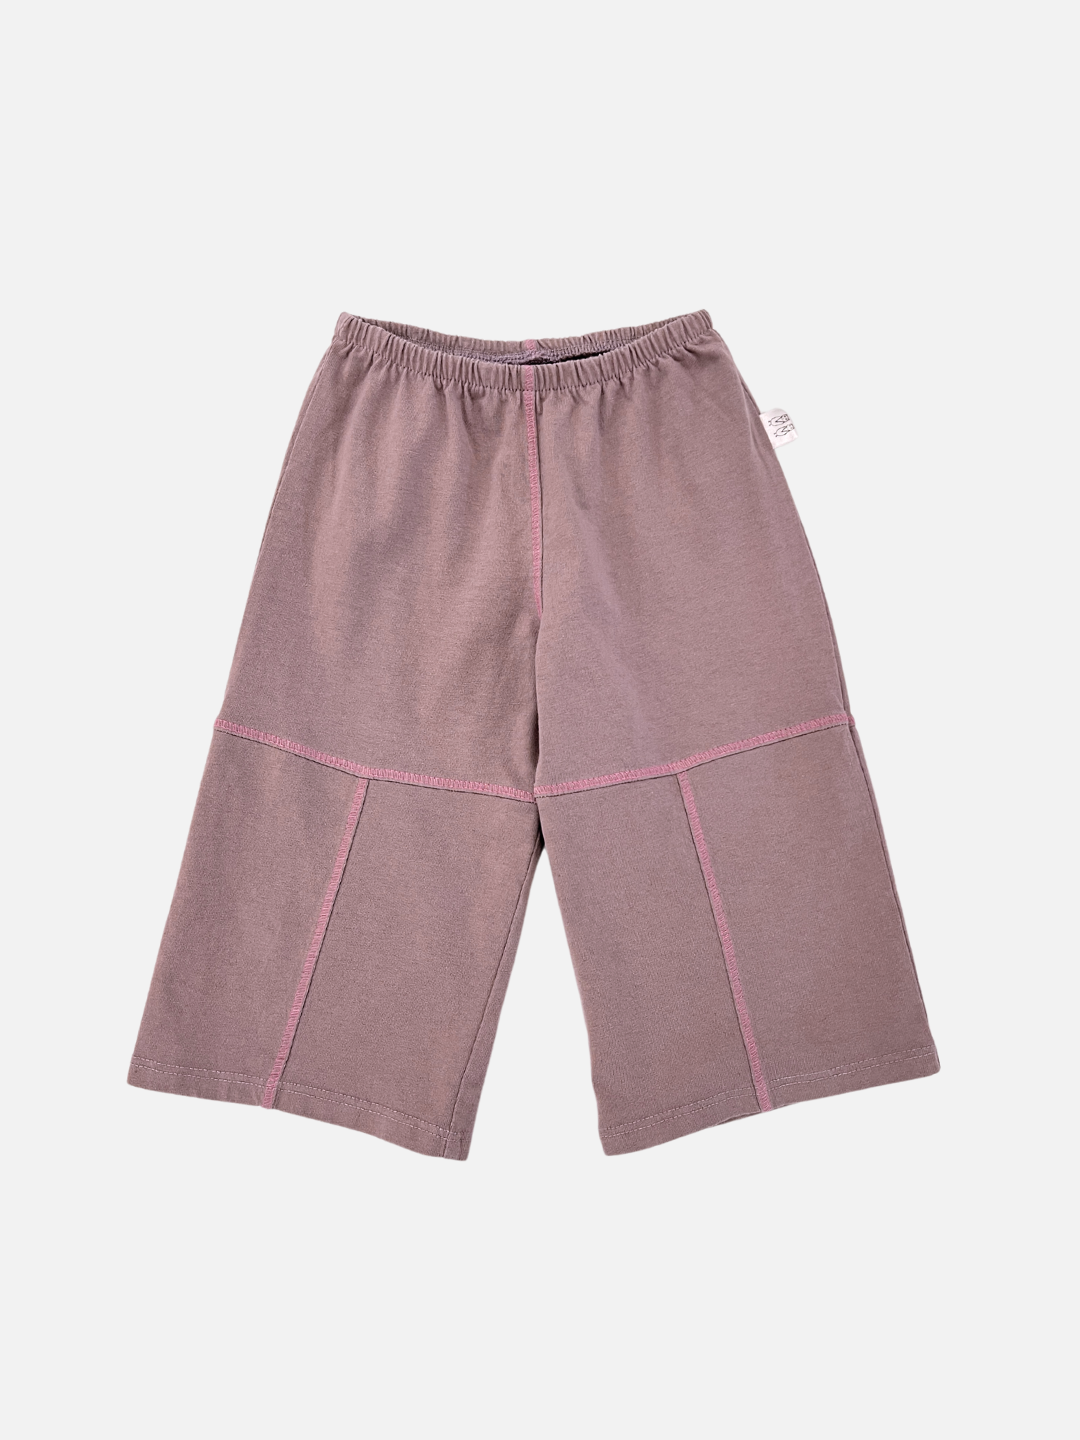  Front of Lavender/Pink Contrast Stitch Baby Pants. Lavender pant with light pink contrast stitching and an elastic waist.